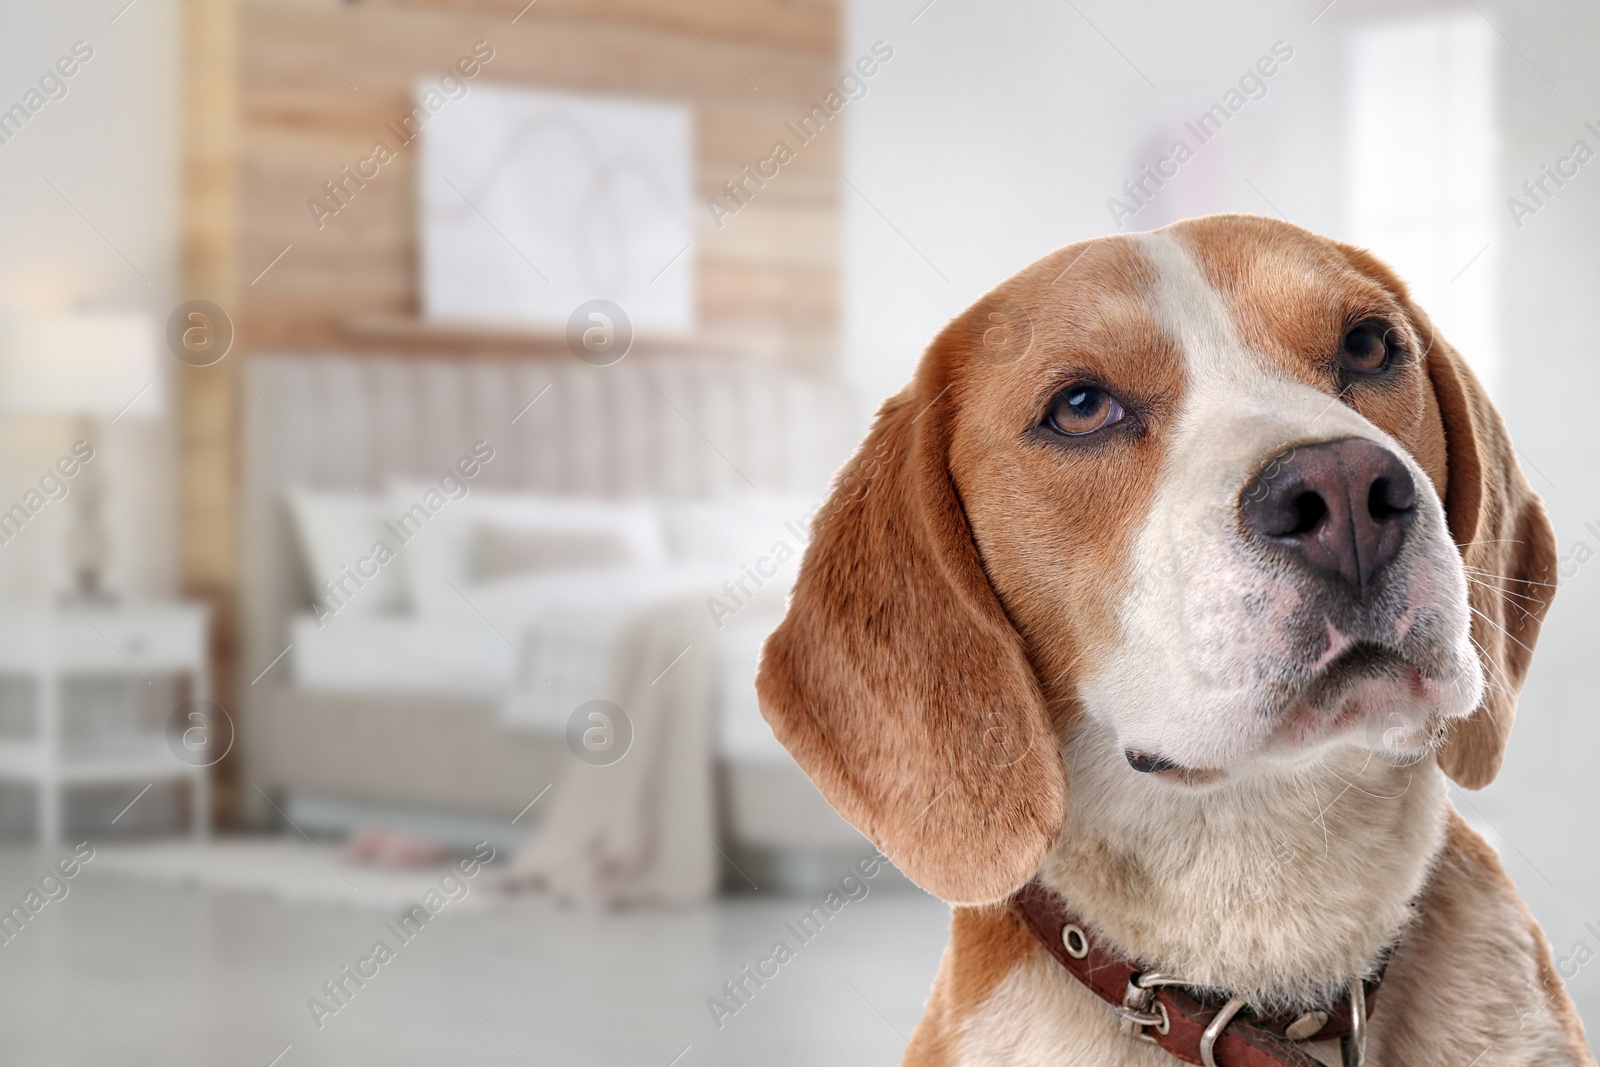 Image of Cute dog in room, space for text. Pet friendly hotel